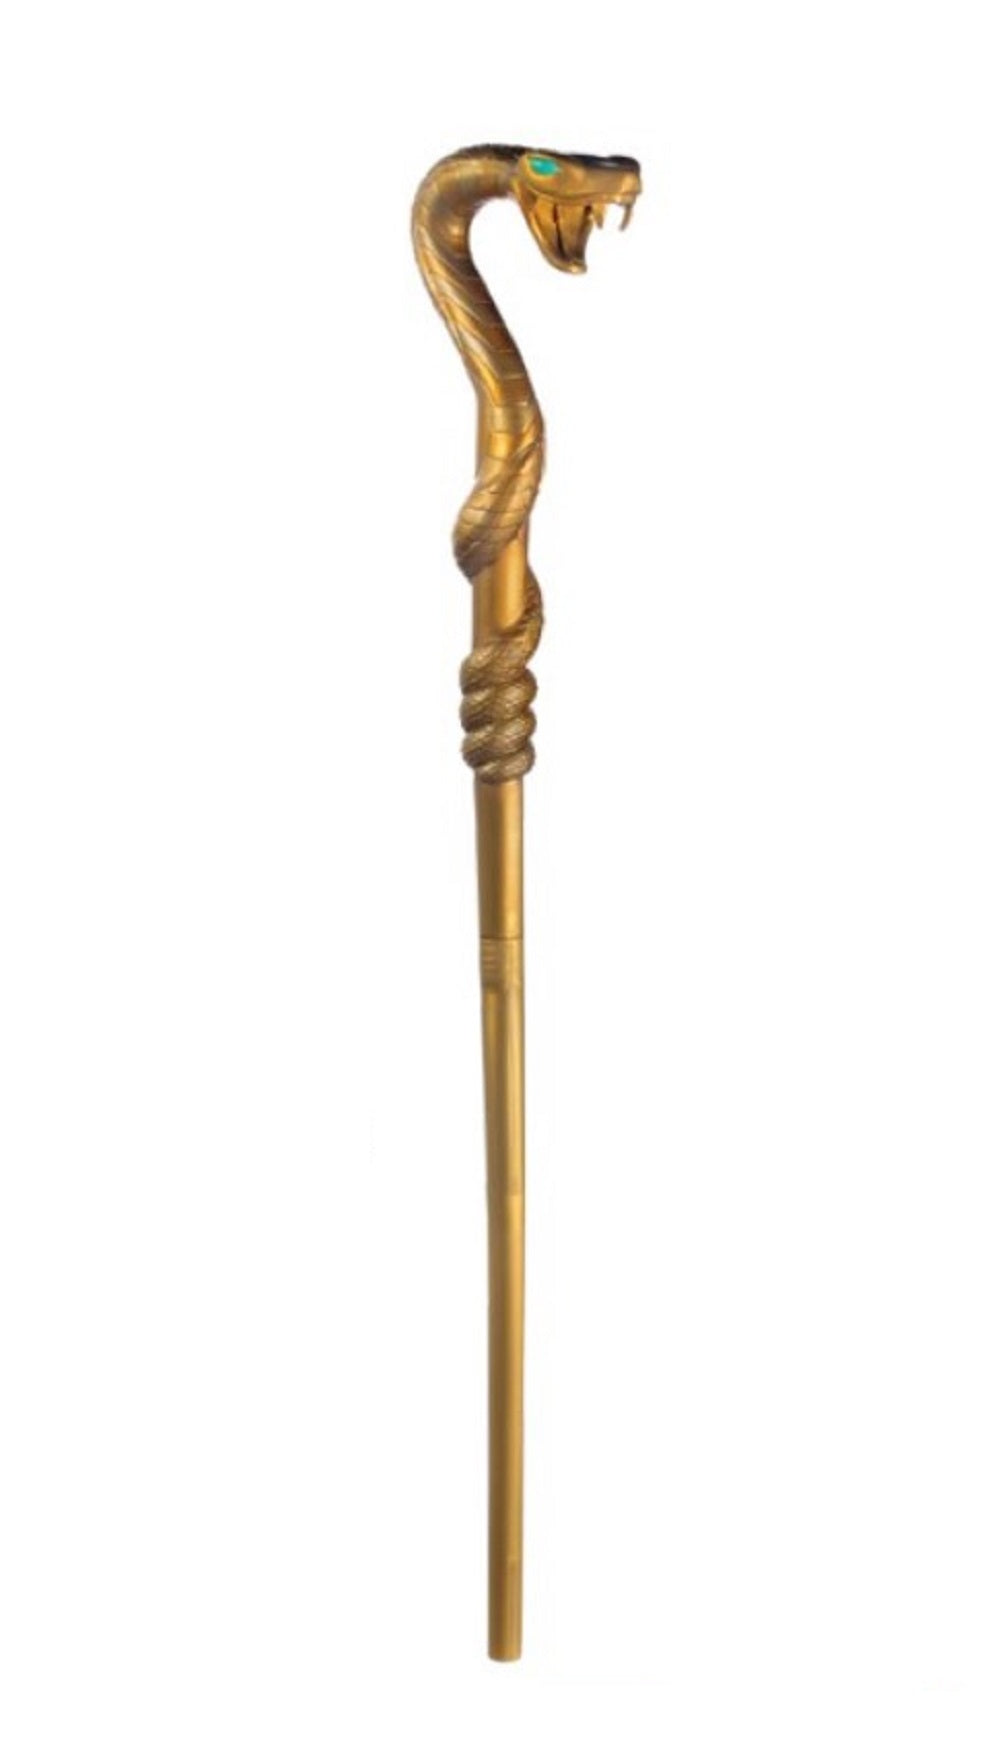 Egyptian Cobra Staff - Gold - 40" - Jafar - Collapsible - Costume Accessory Prop